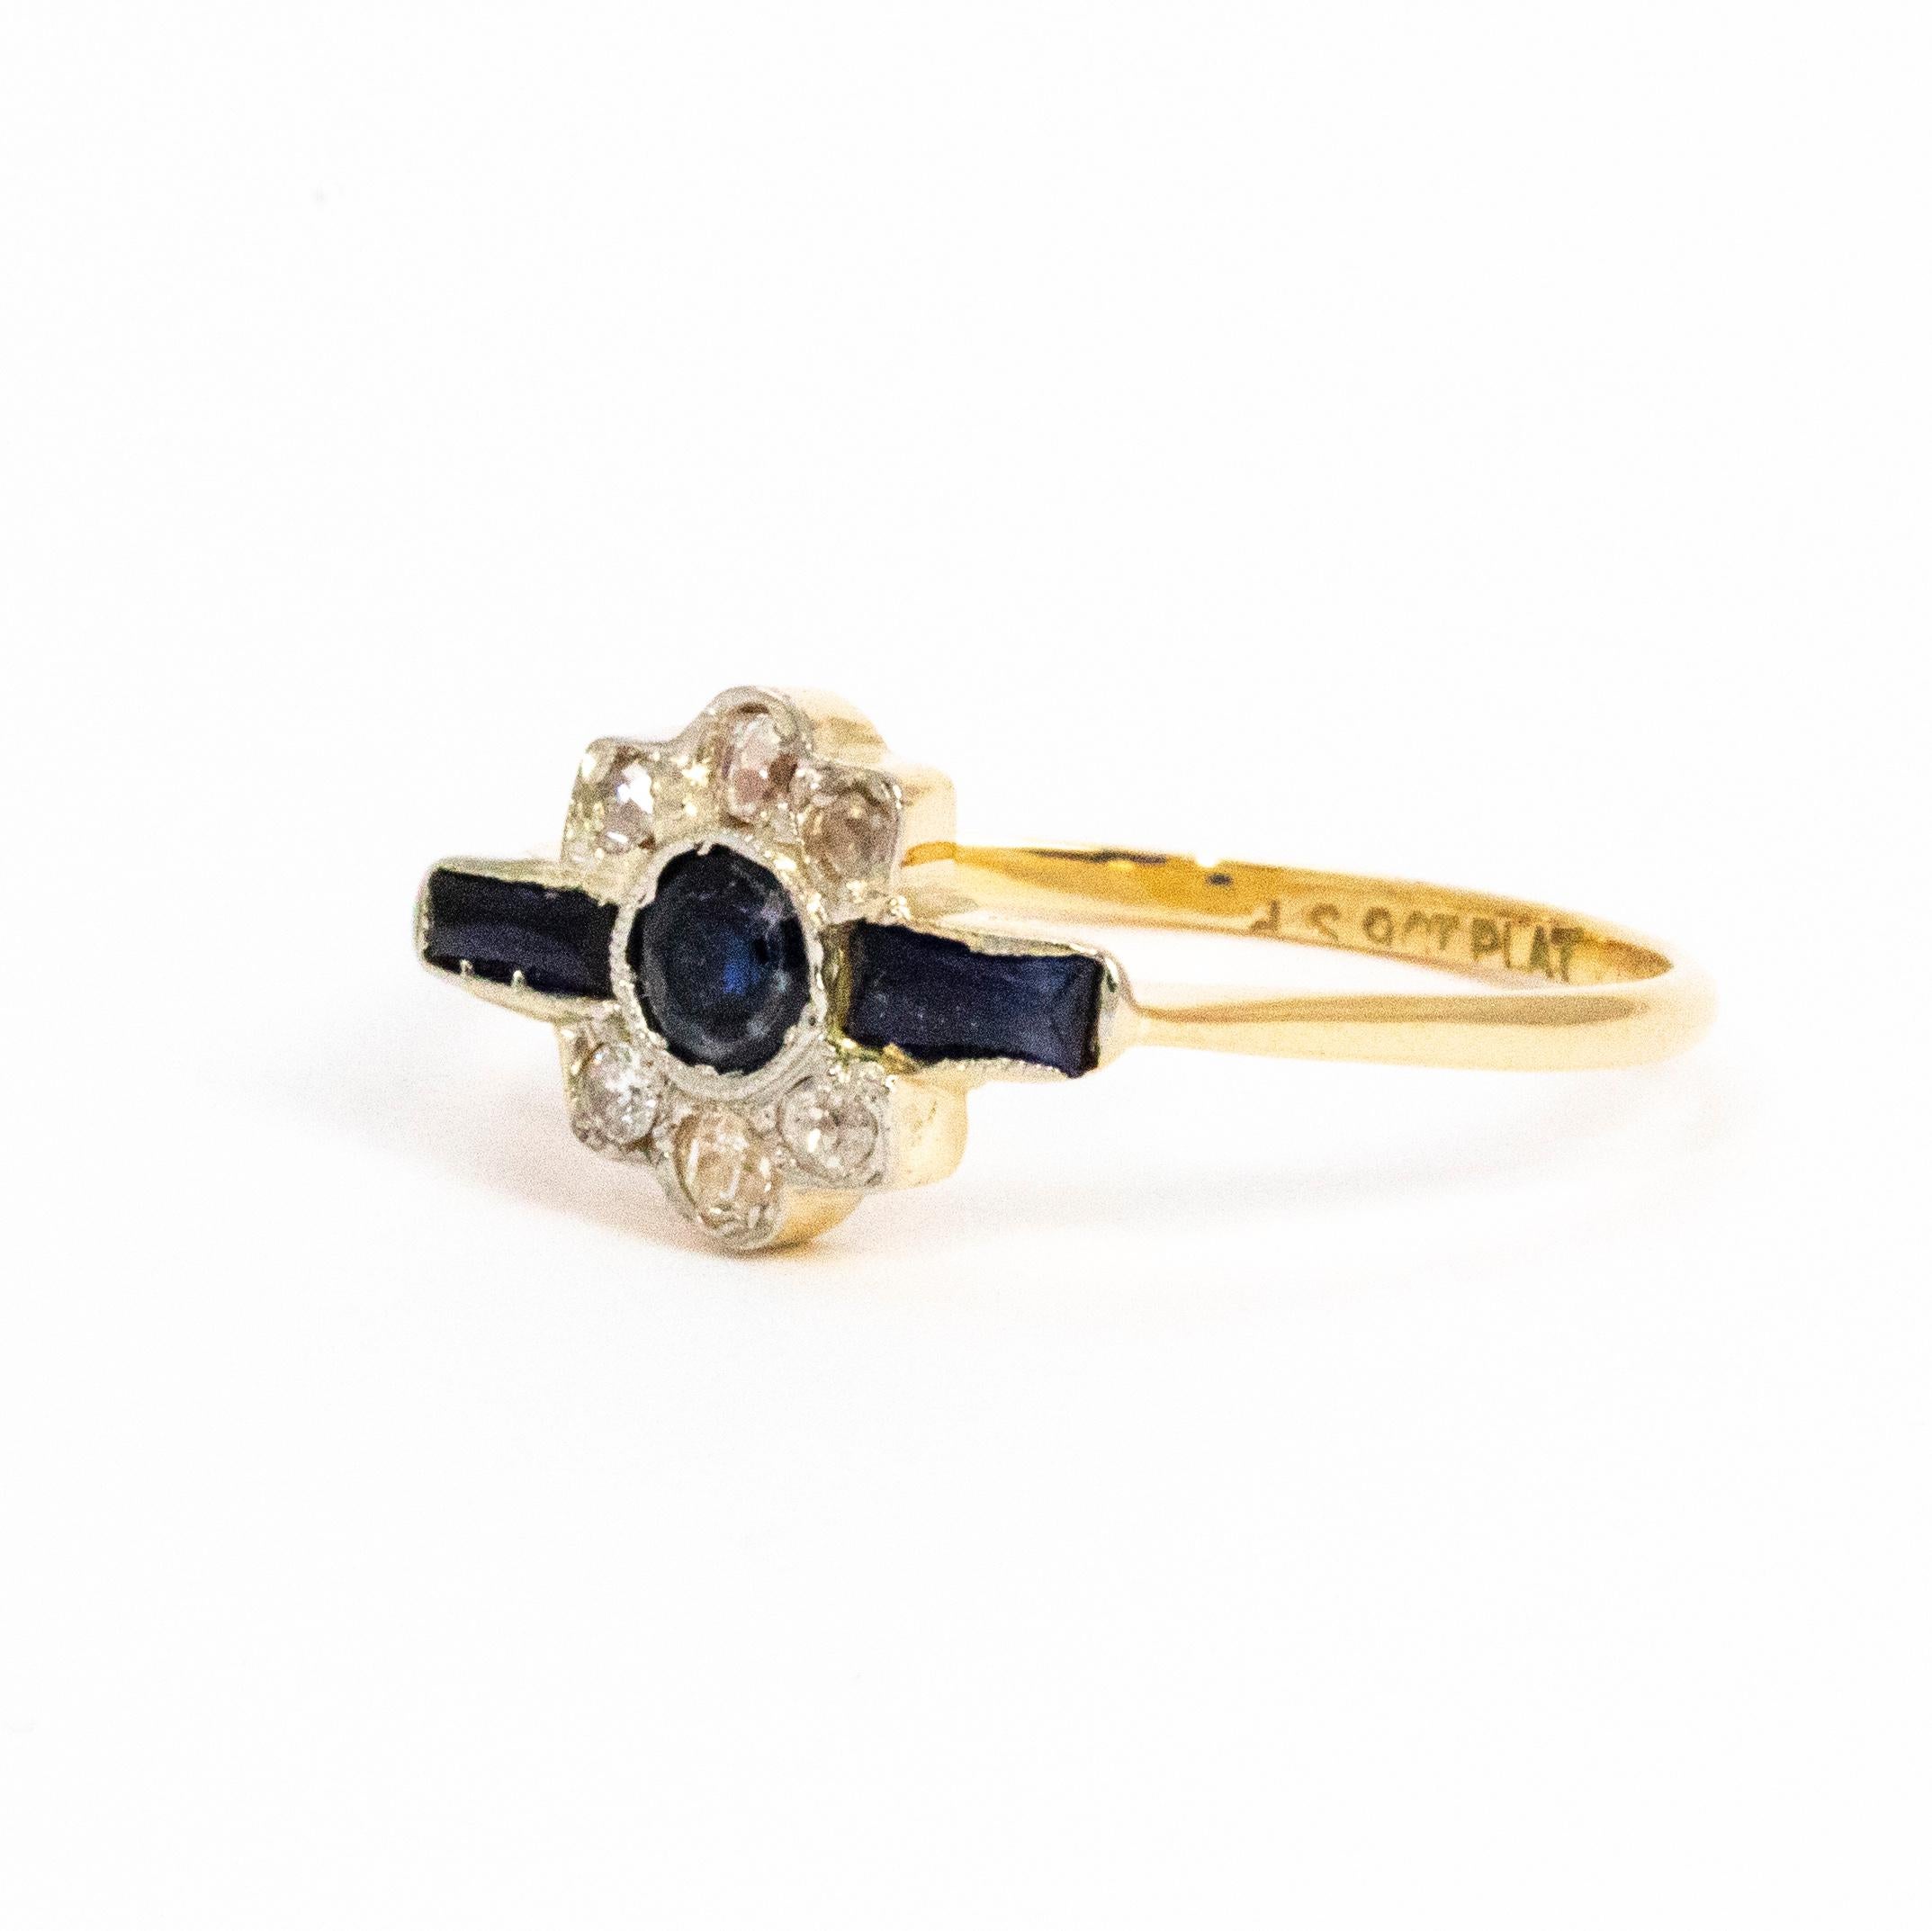 Absolutely charming Art Deco ring holding 3 sapphires and 6 diamonds in 9ct gold. Such a delicate piece!

Ring Size: M 1/2 or 6.5